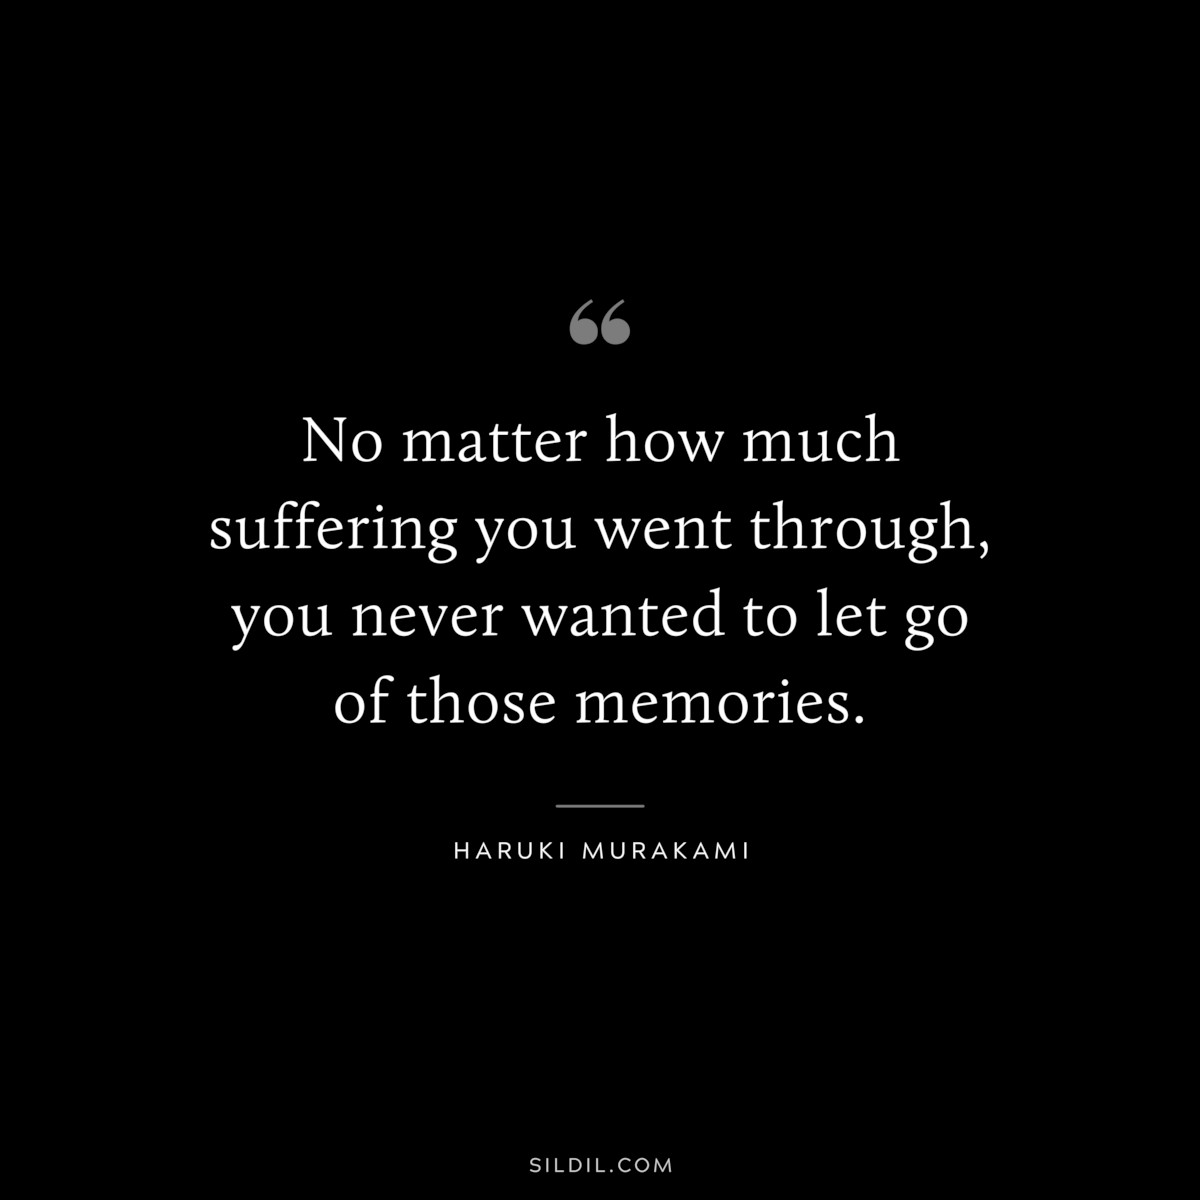 No matter how much suffering you went through, you never wanted to let go of those memories. ― Haruki Murakami